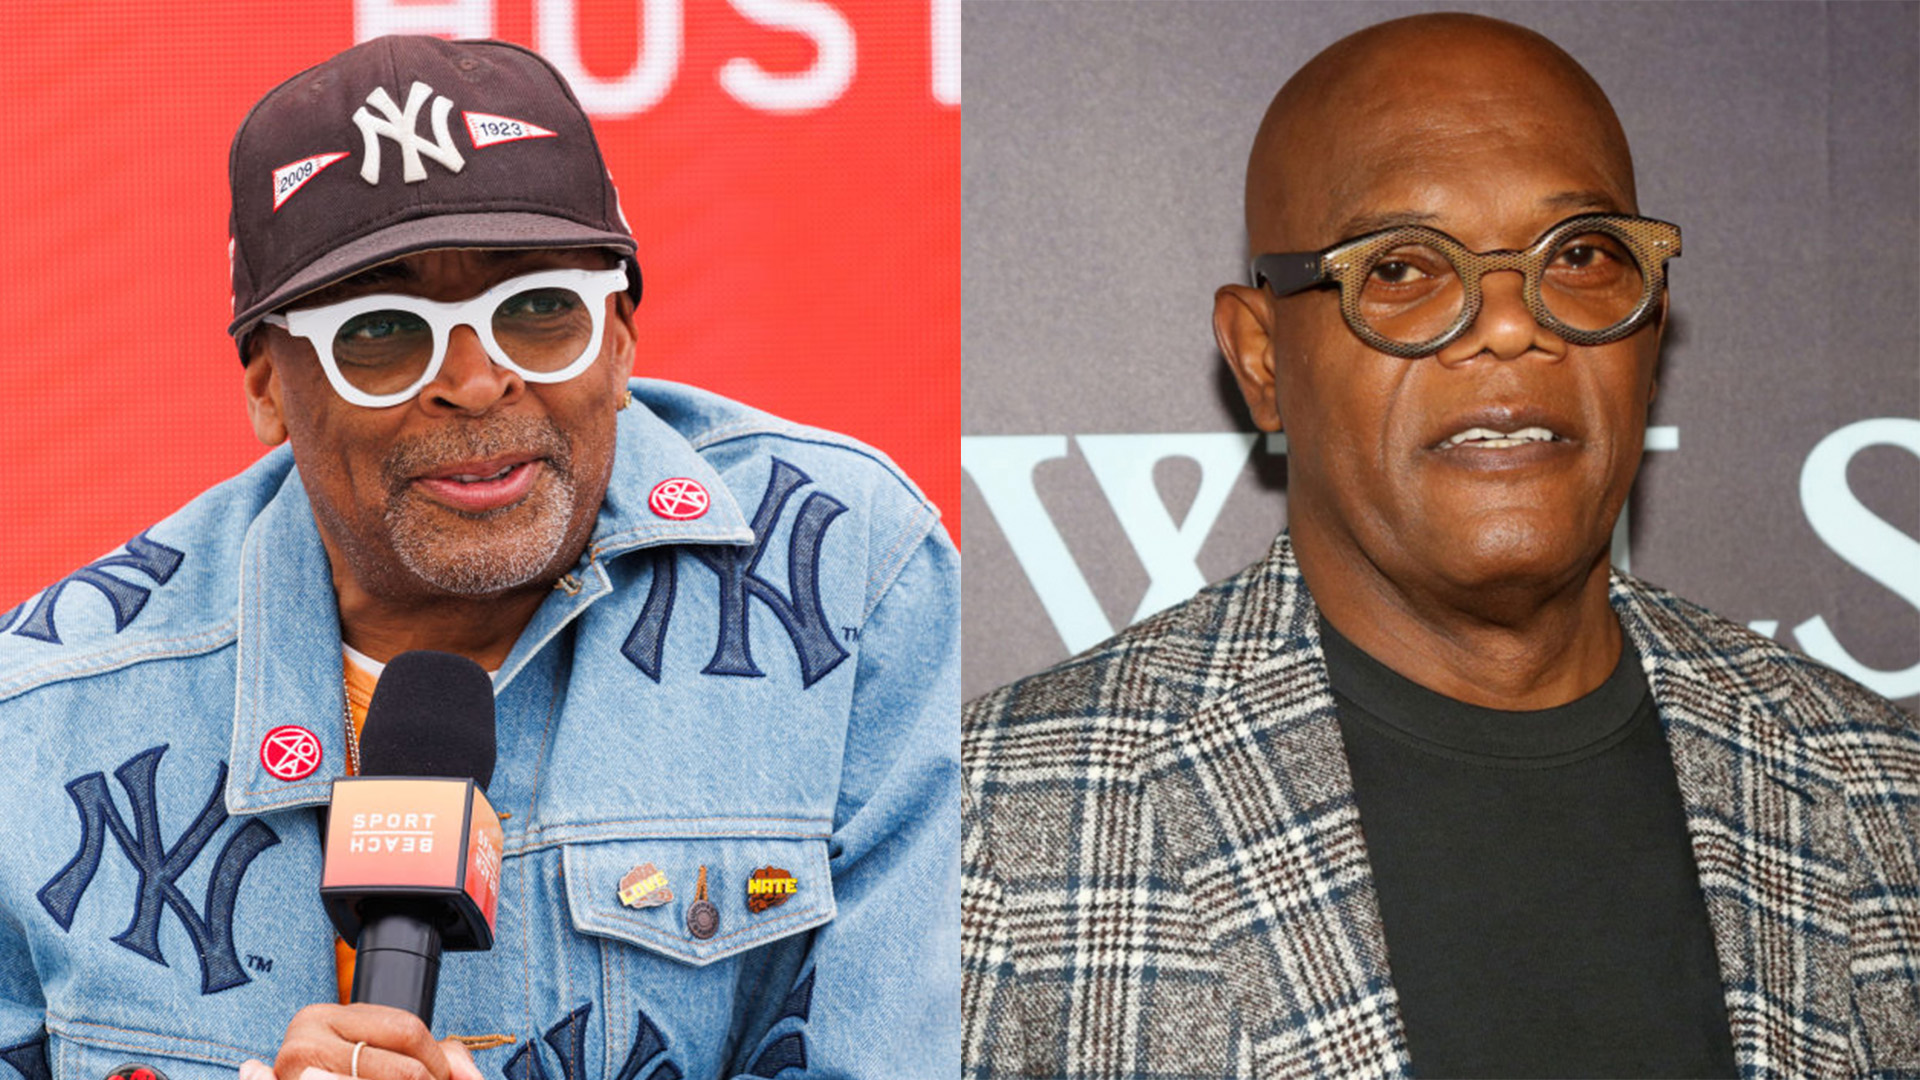 'We Fell Out:' Samuel L. Jackson Recalls Declining A Role With Spike Lee Due To A Salary Disagreement